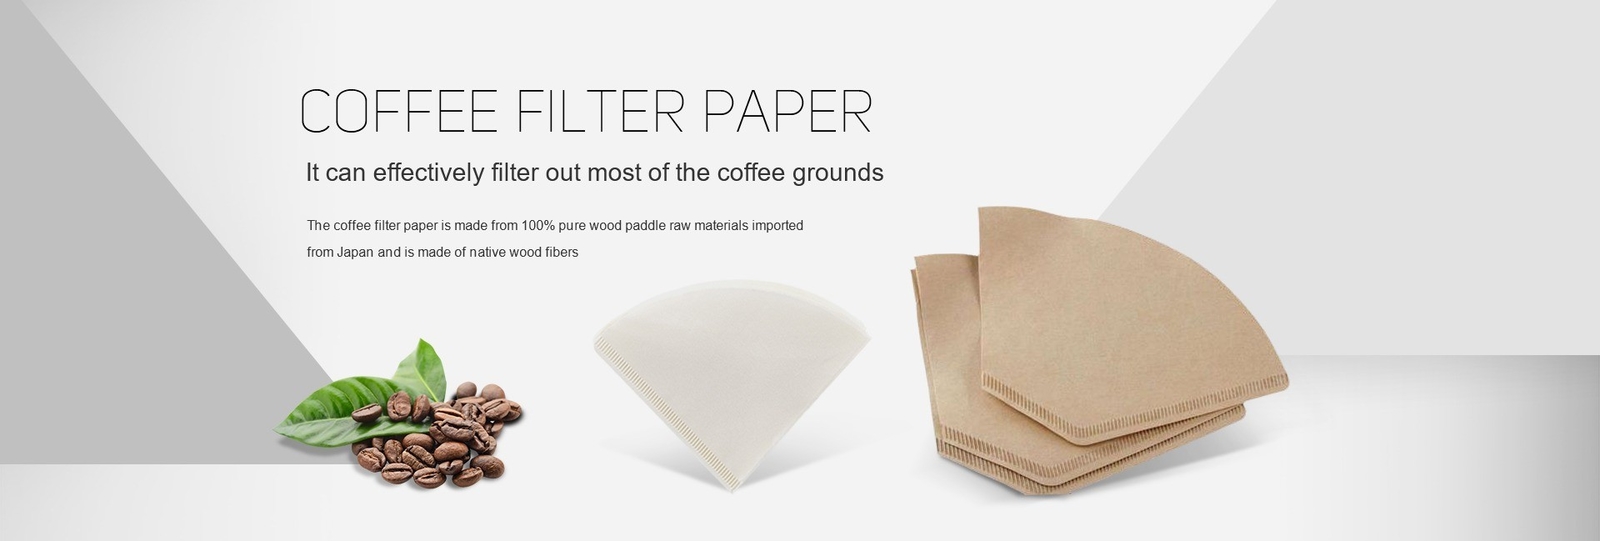 V Shaped Coffee Filter